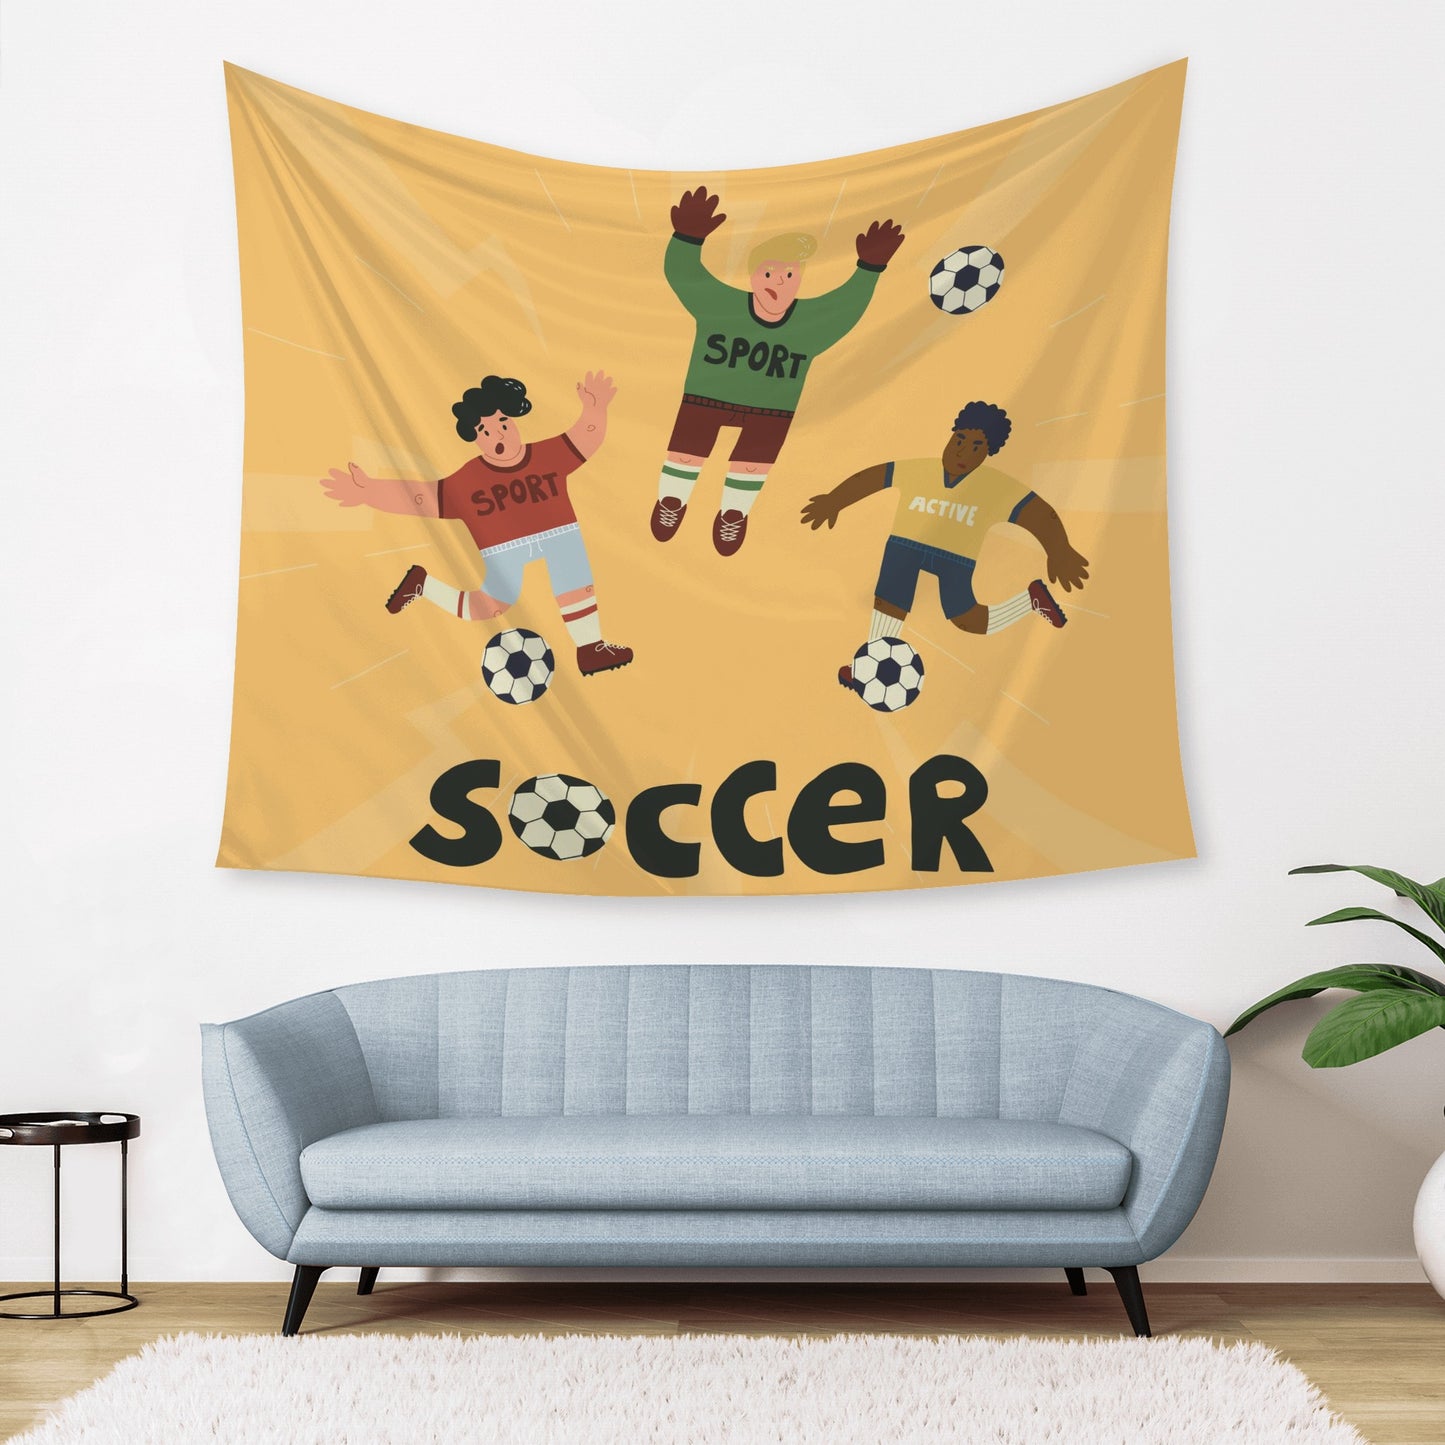 Soccer is Life Tapestry To Bring A Sporty Feel to Any Room